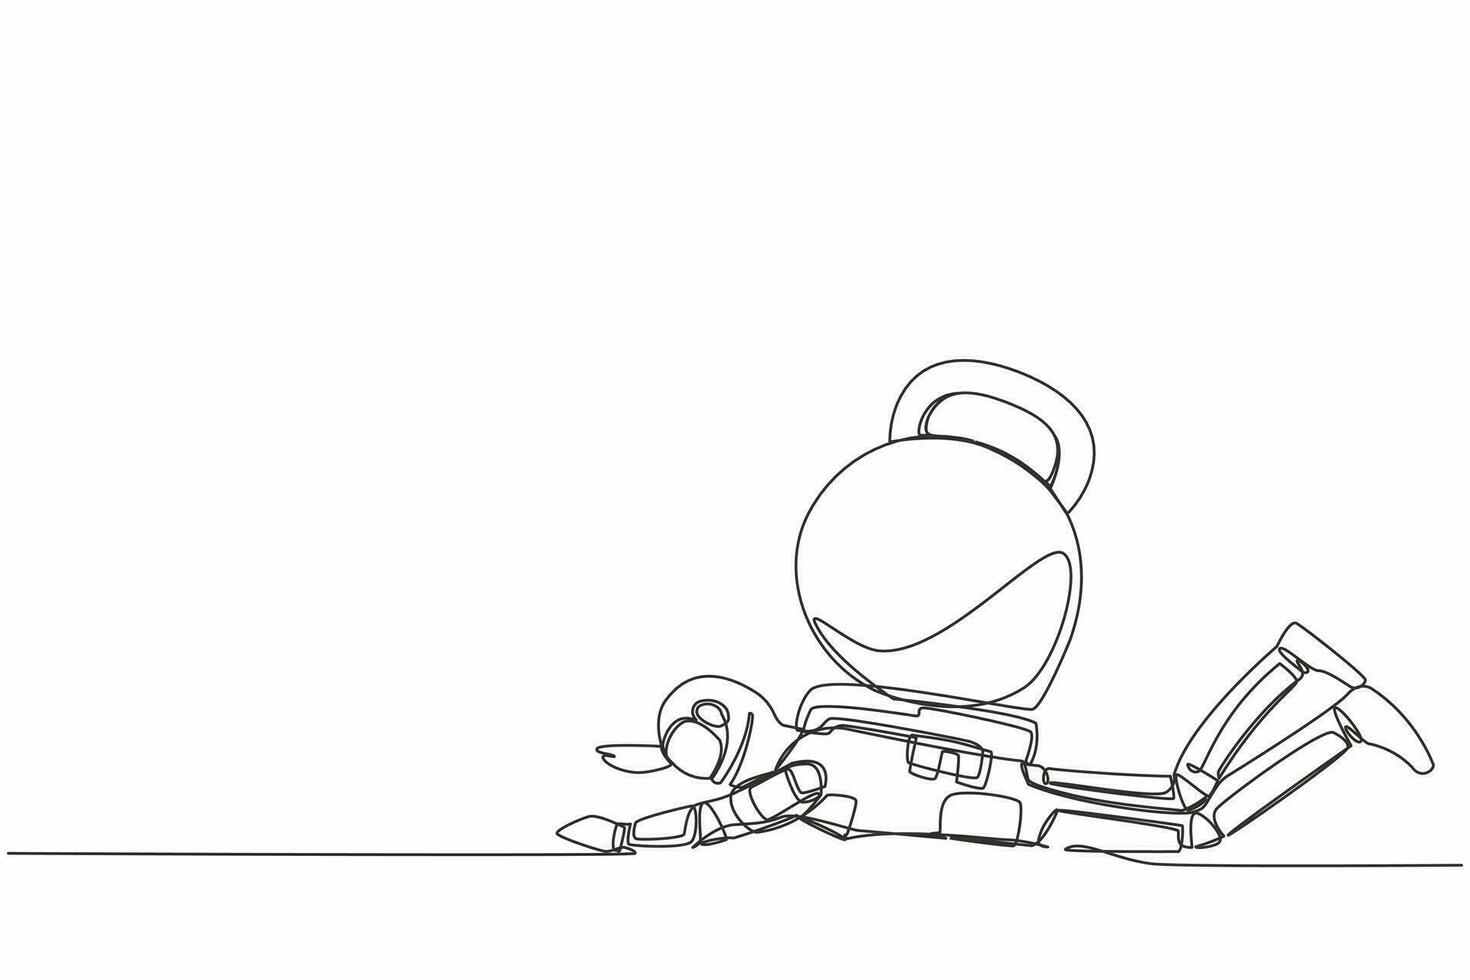 Single one line drawing young astronaut under heavy kettlebell burden. Financial crisis in space company. Technology development. Cosmic galaxy space. Continuous line draw design vector illustration